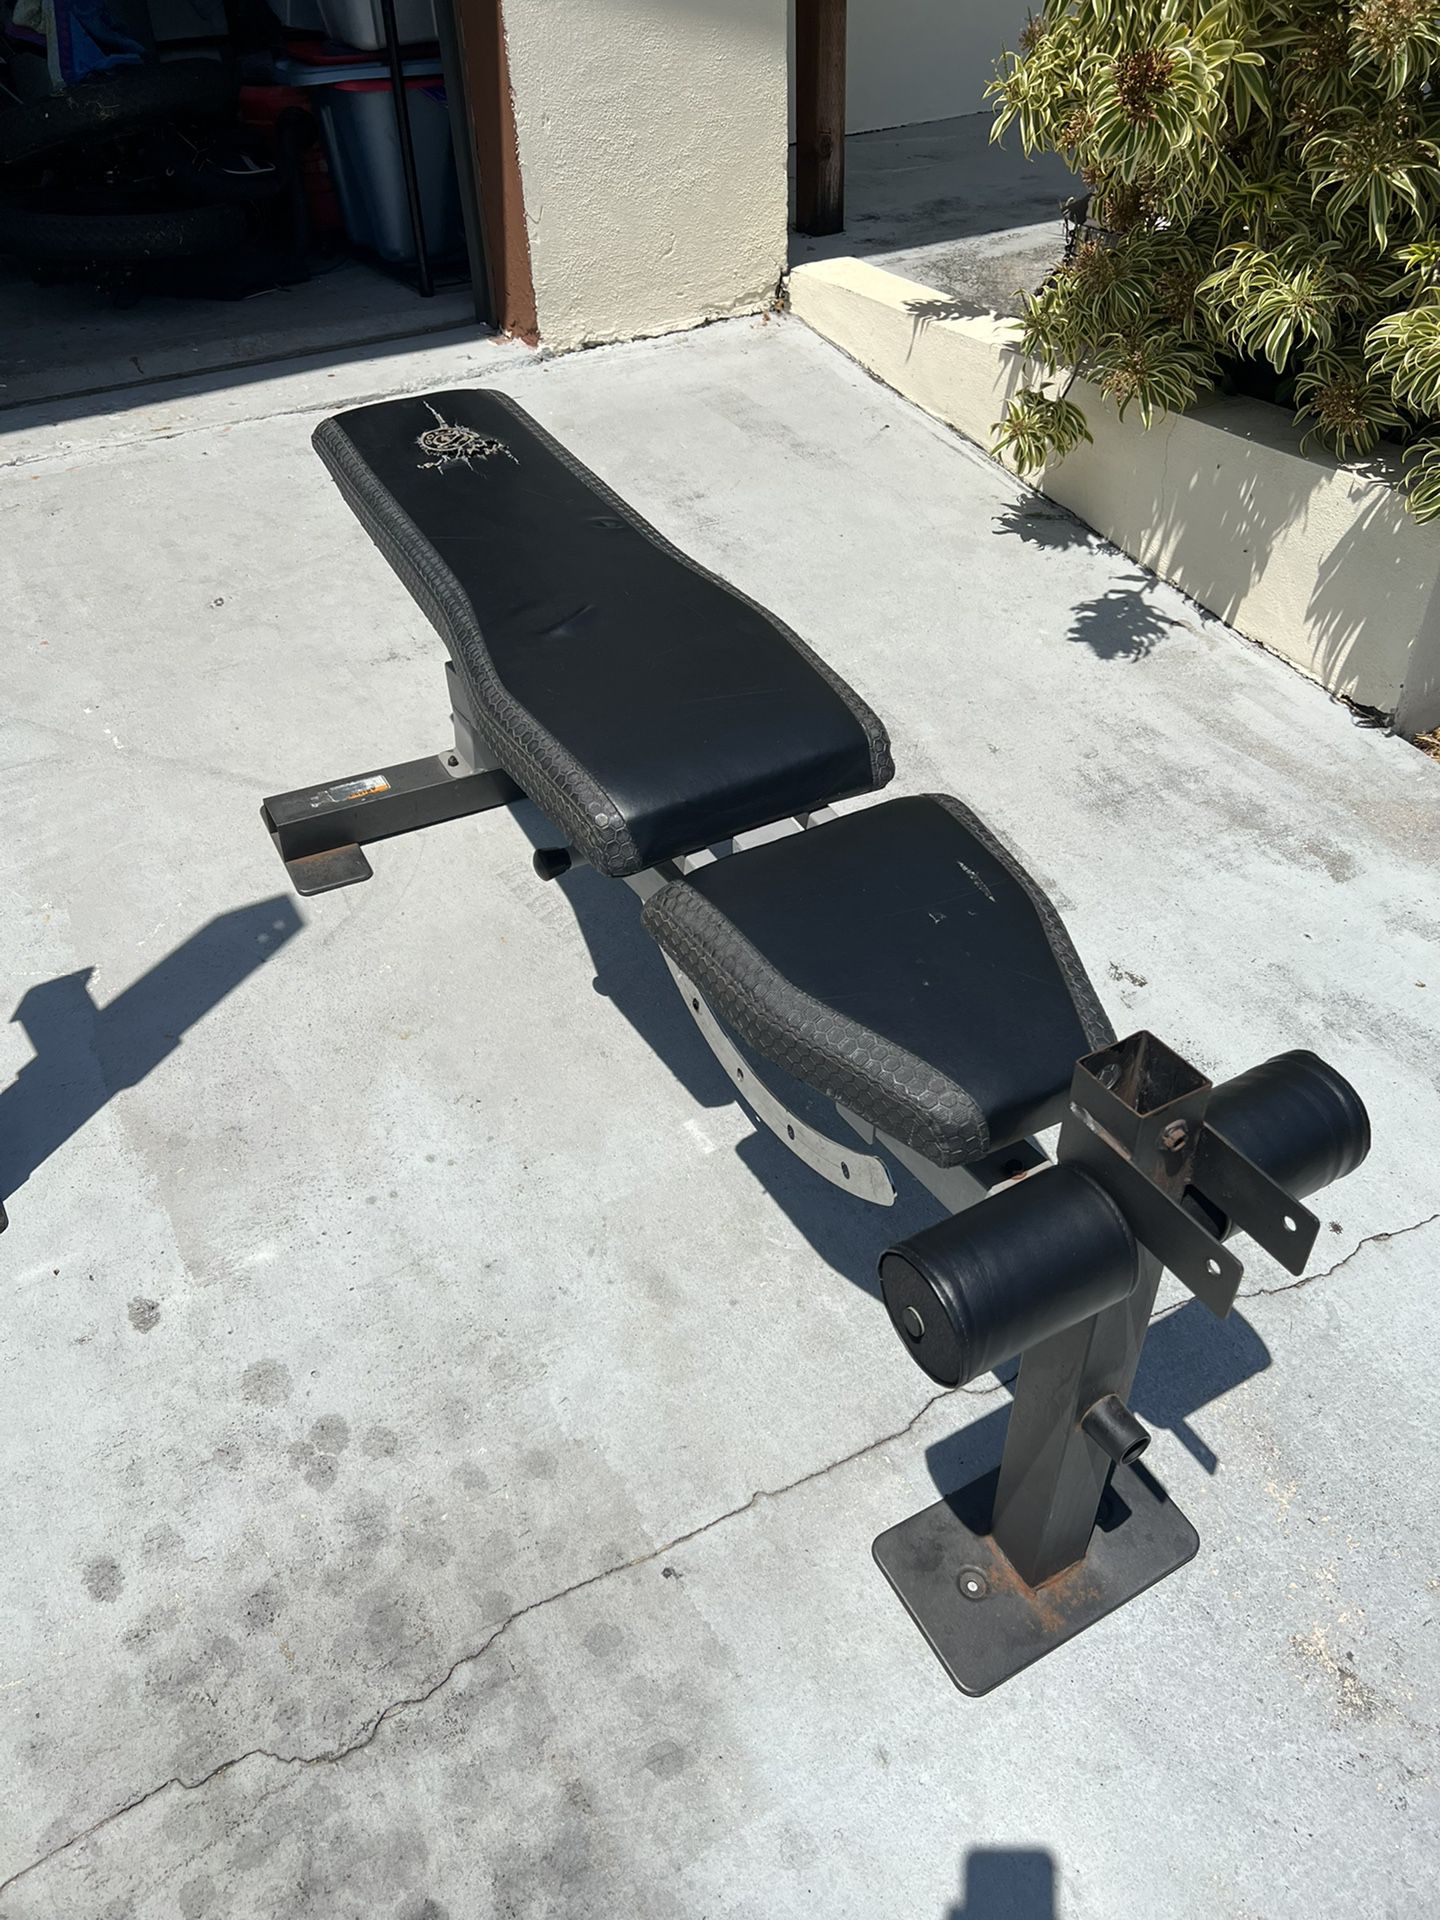 Gold’s Gym Heavy Adjustable Weight Bench